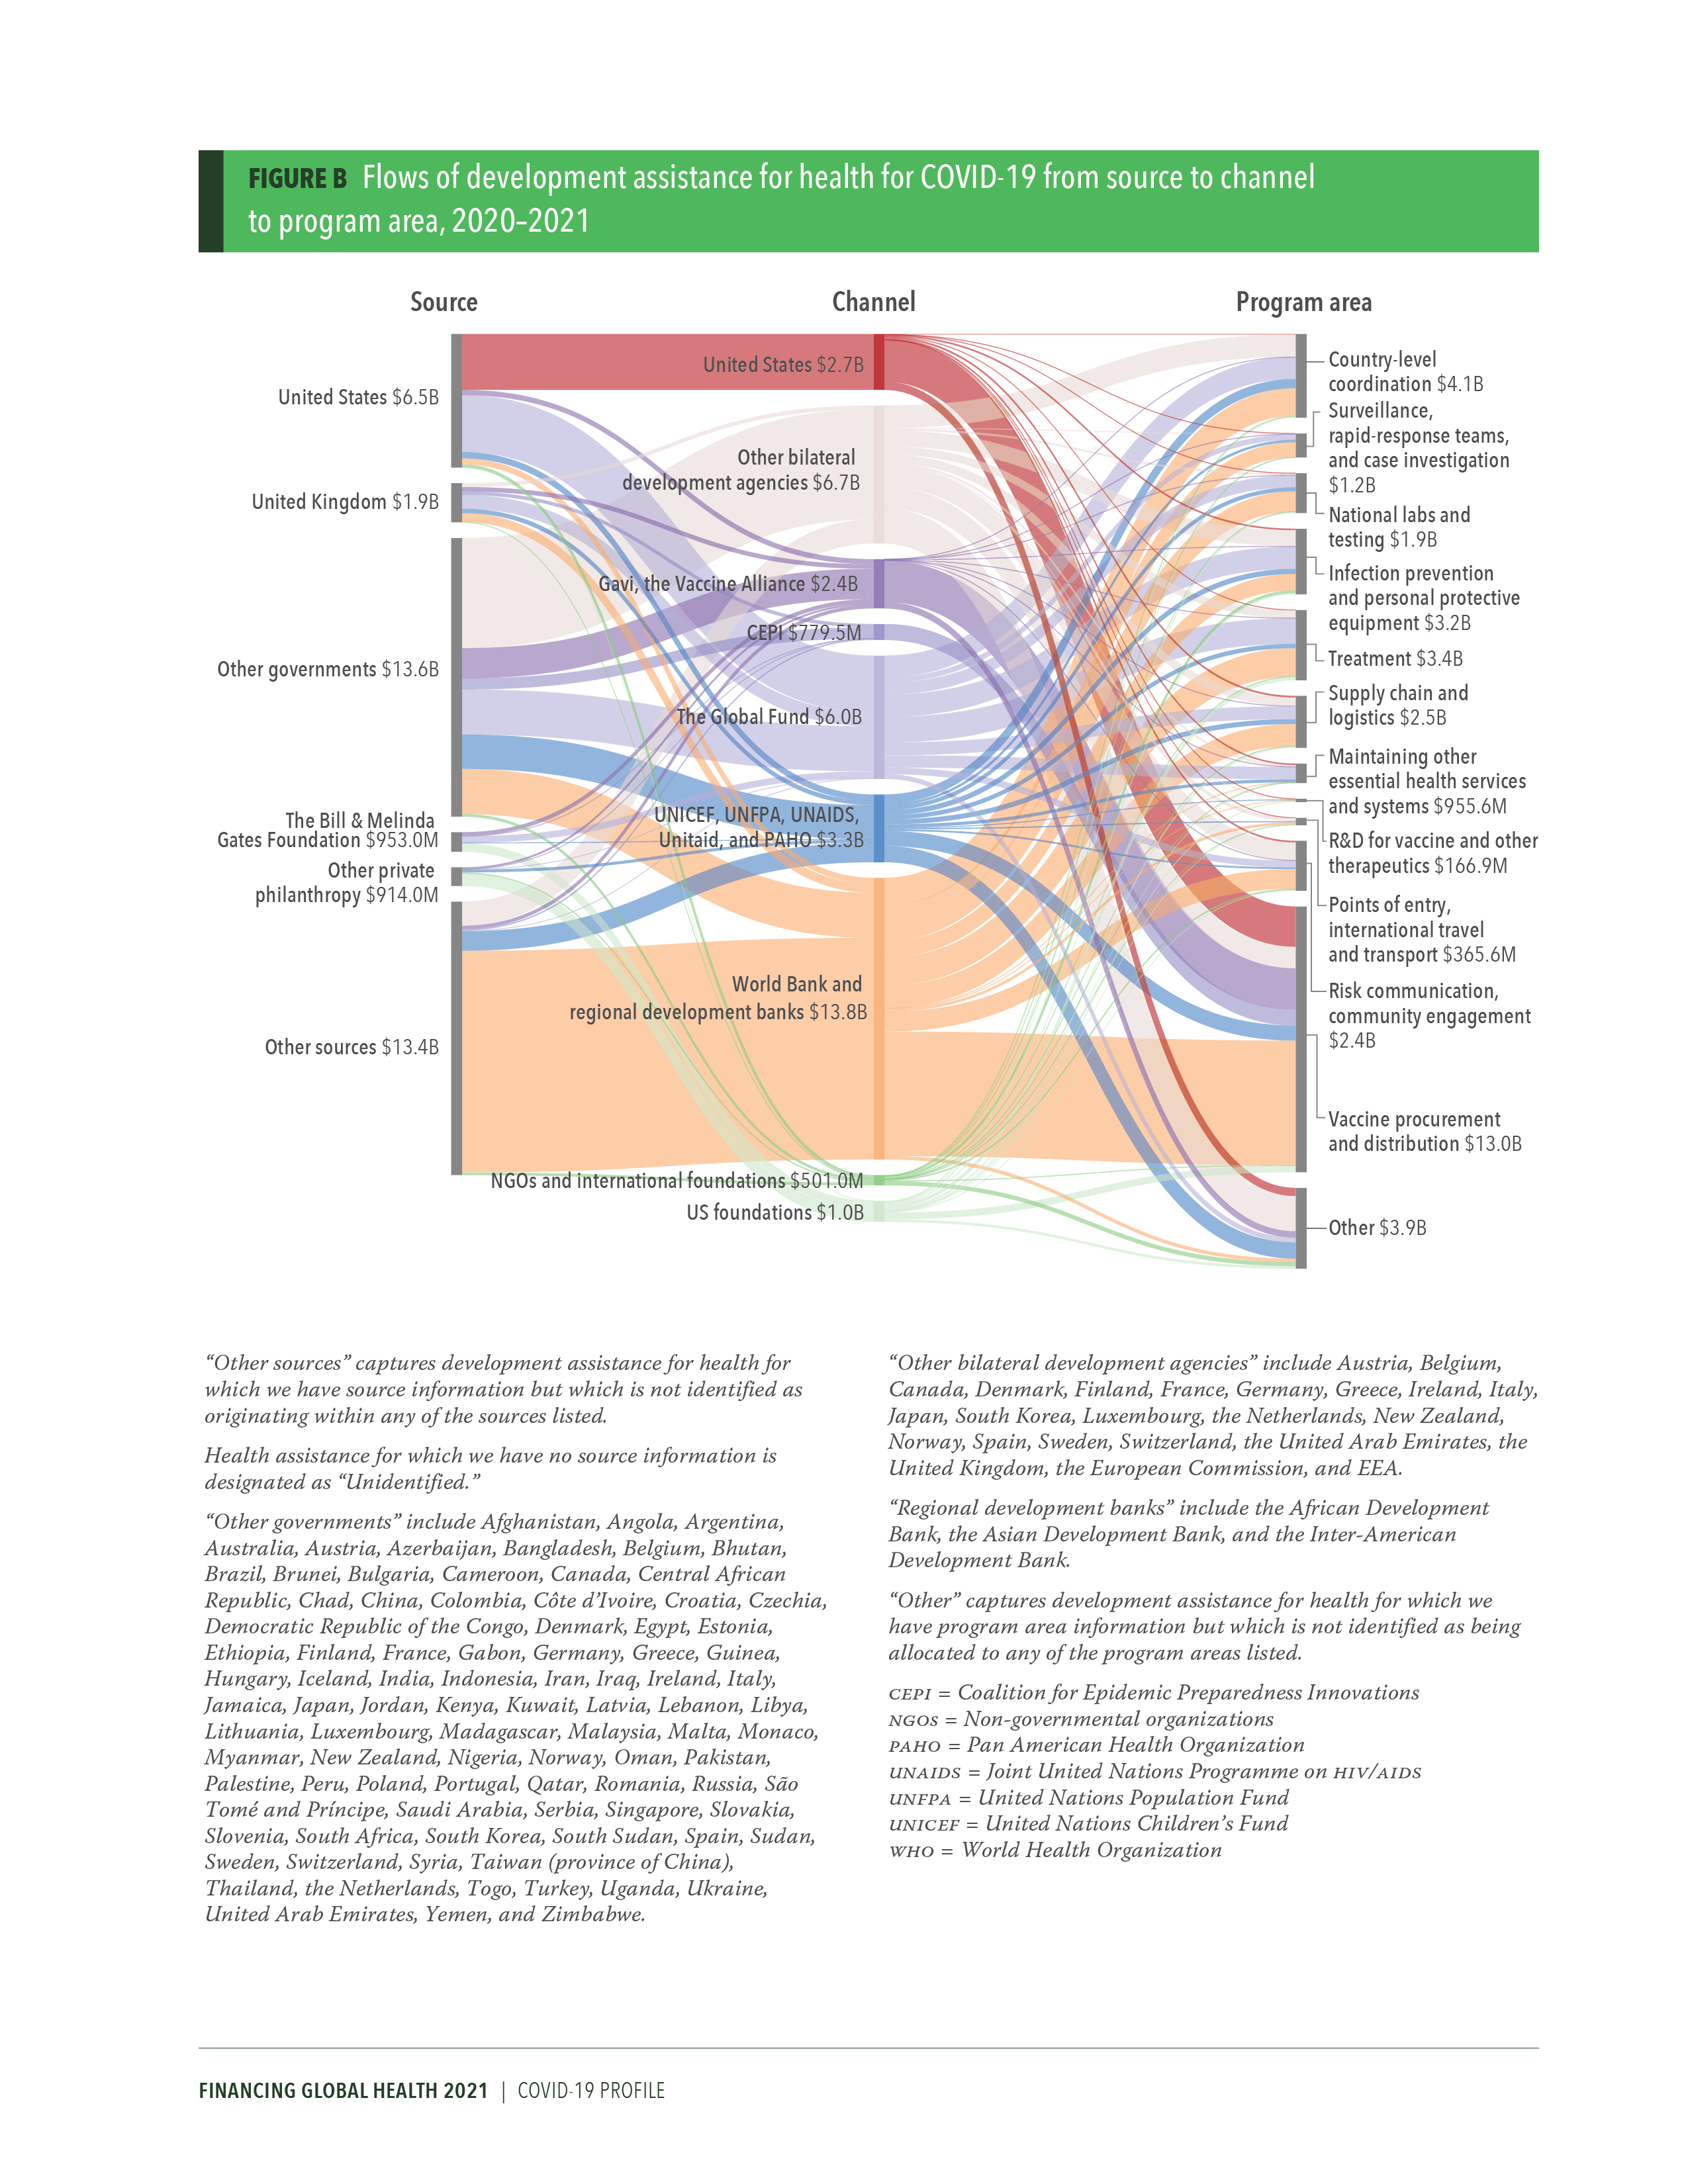 Disease spending profile for COVID-19: page 2 shows a diagram of flows of development assistance for health from source to channel to program area. Download the profile for more details. 